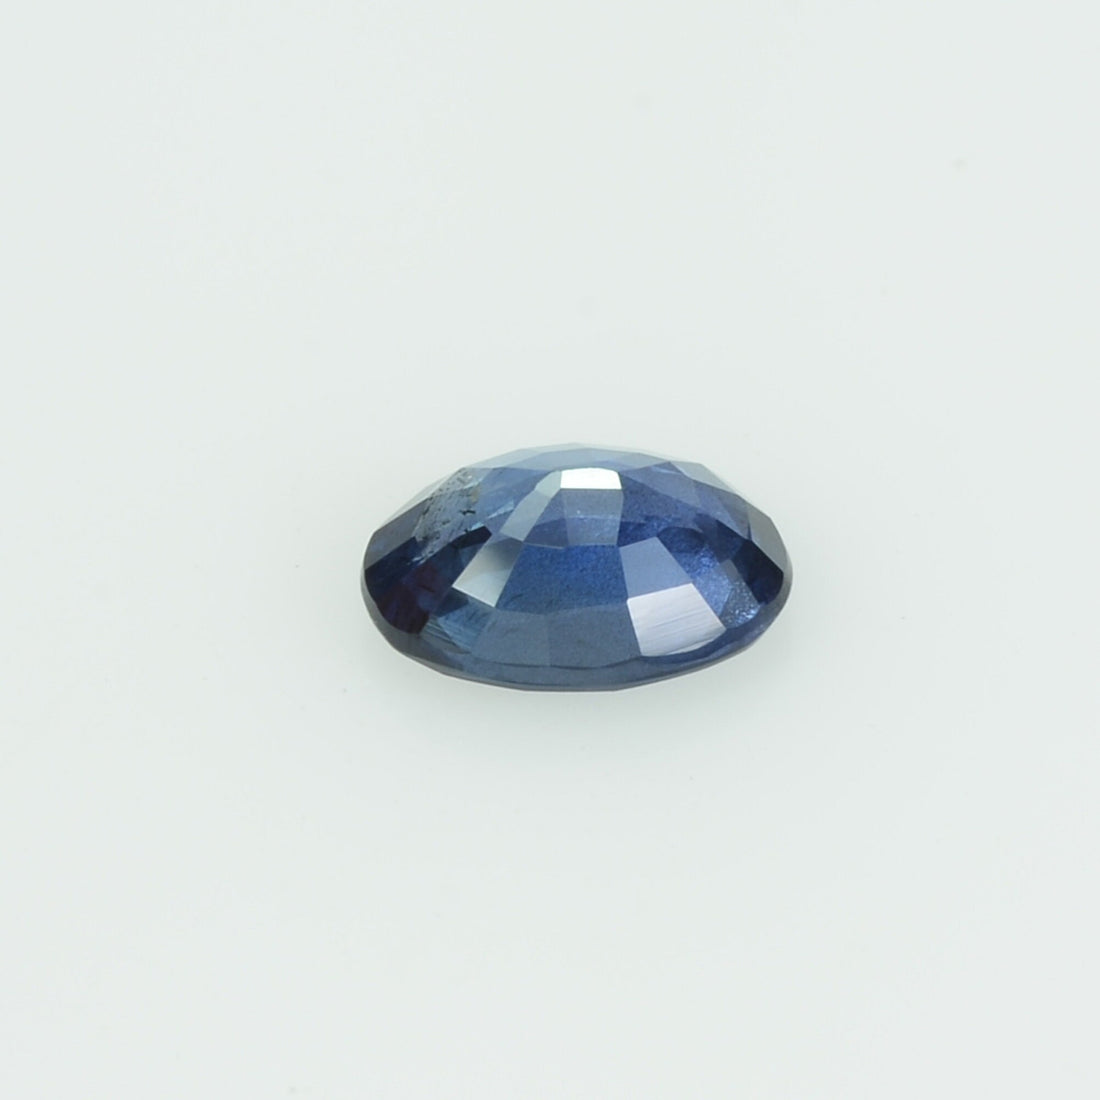 0.59 cts natural blue sapphire loose gemstone oval cut